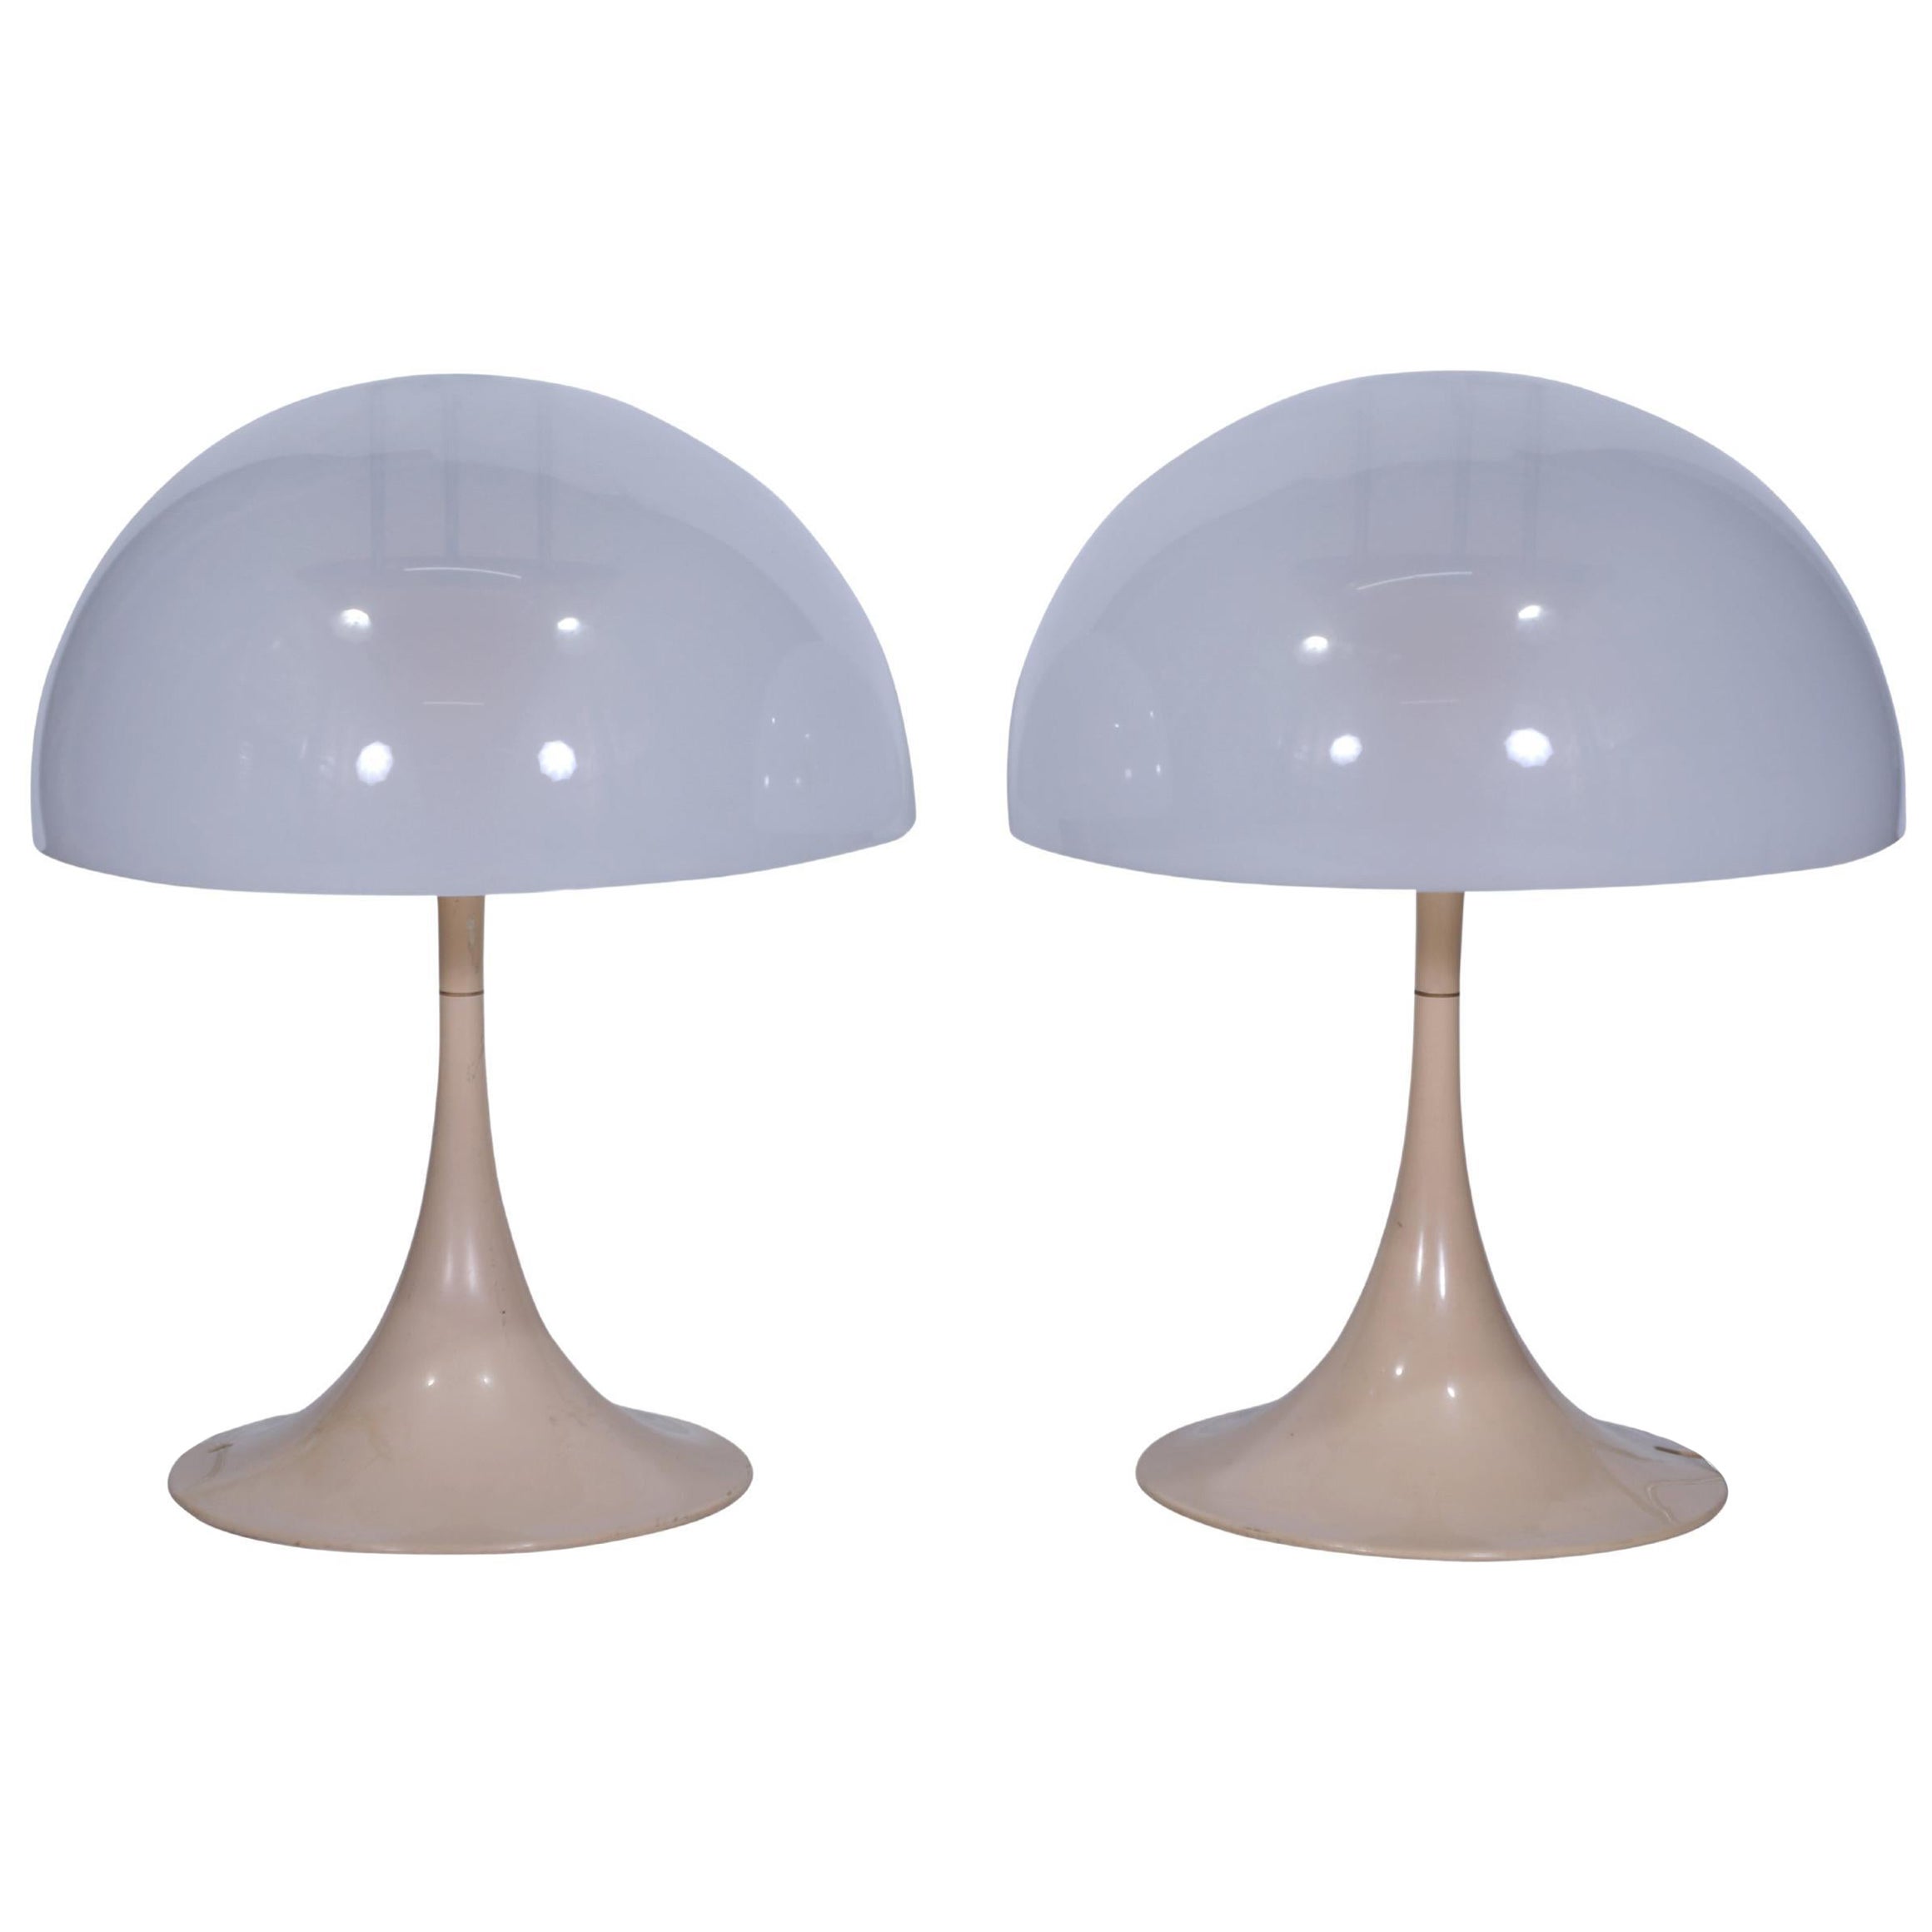 Pair of Mid-Century Modern Acrylic Tulip Base Table Lamps by Louis Paulsen